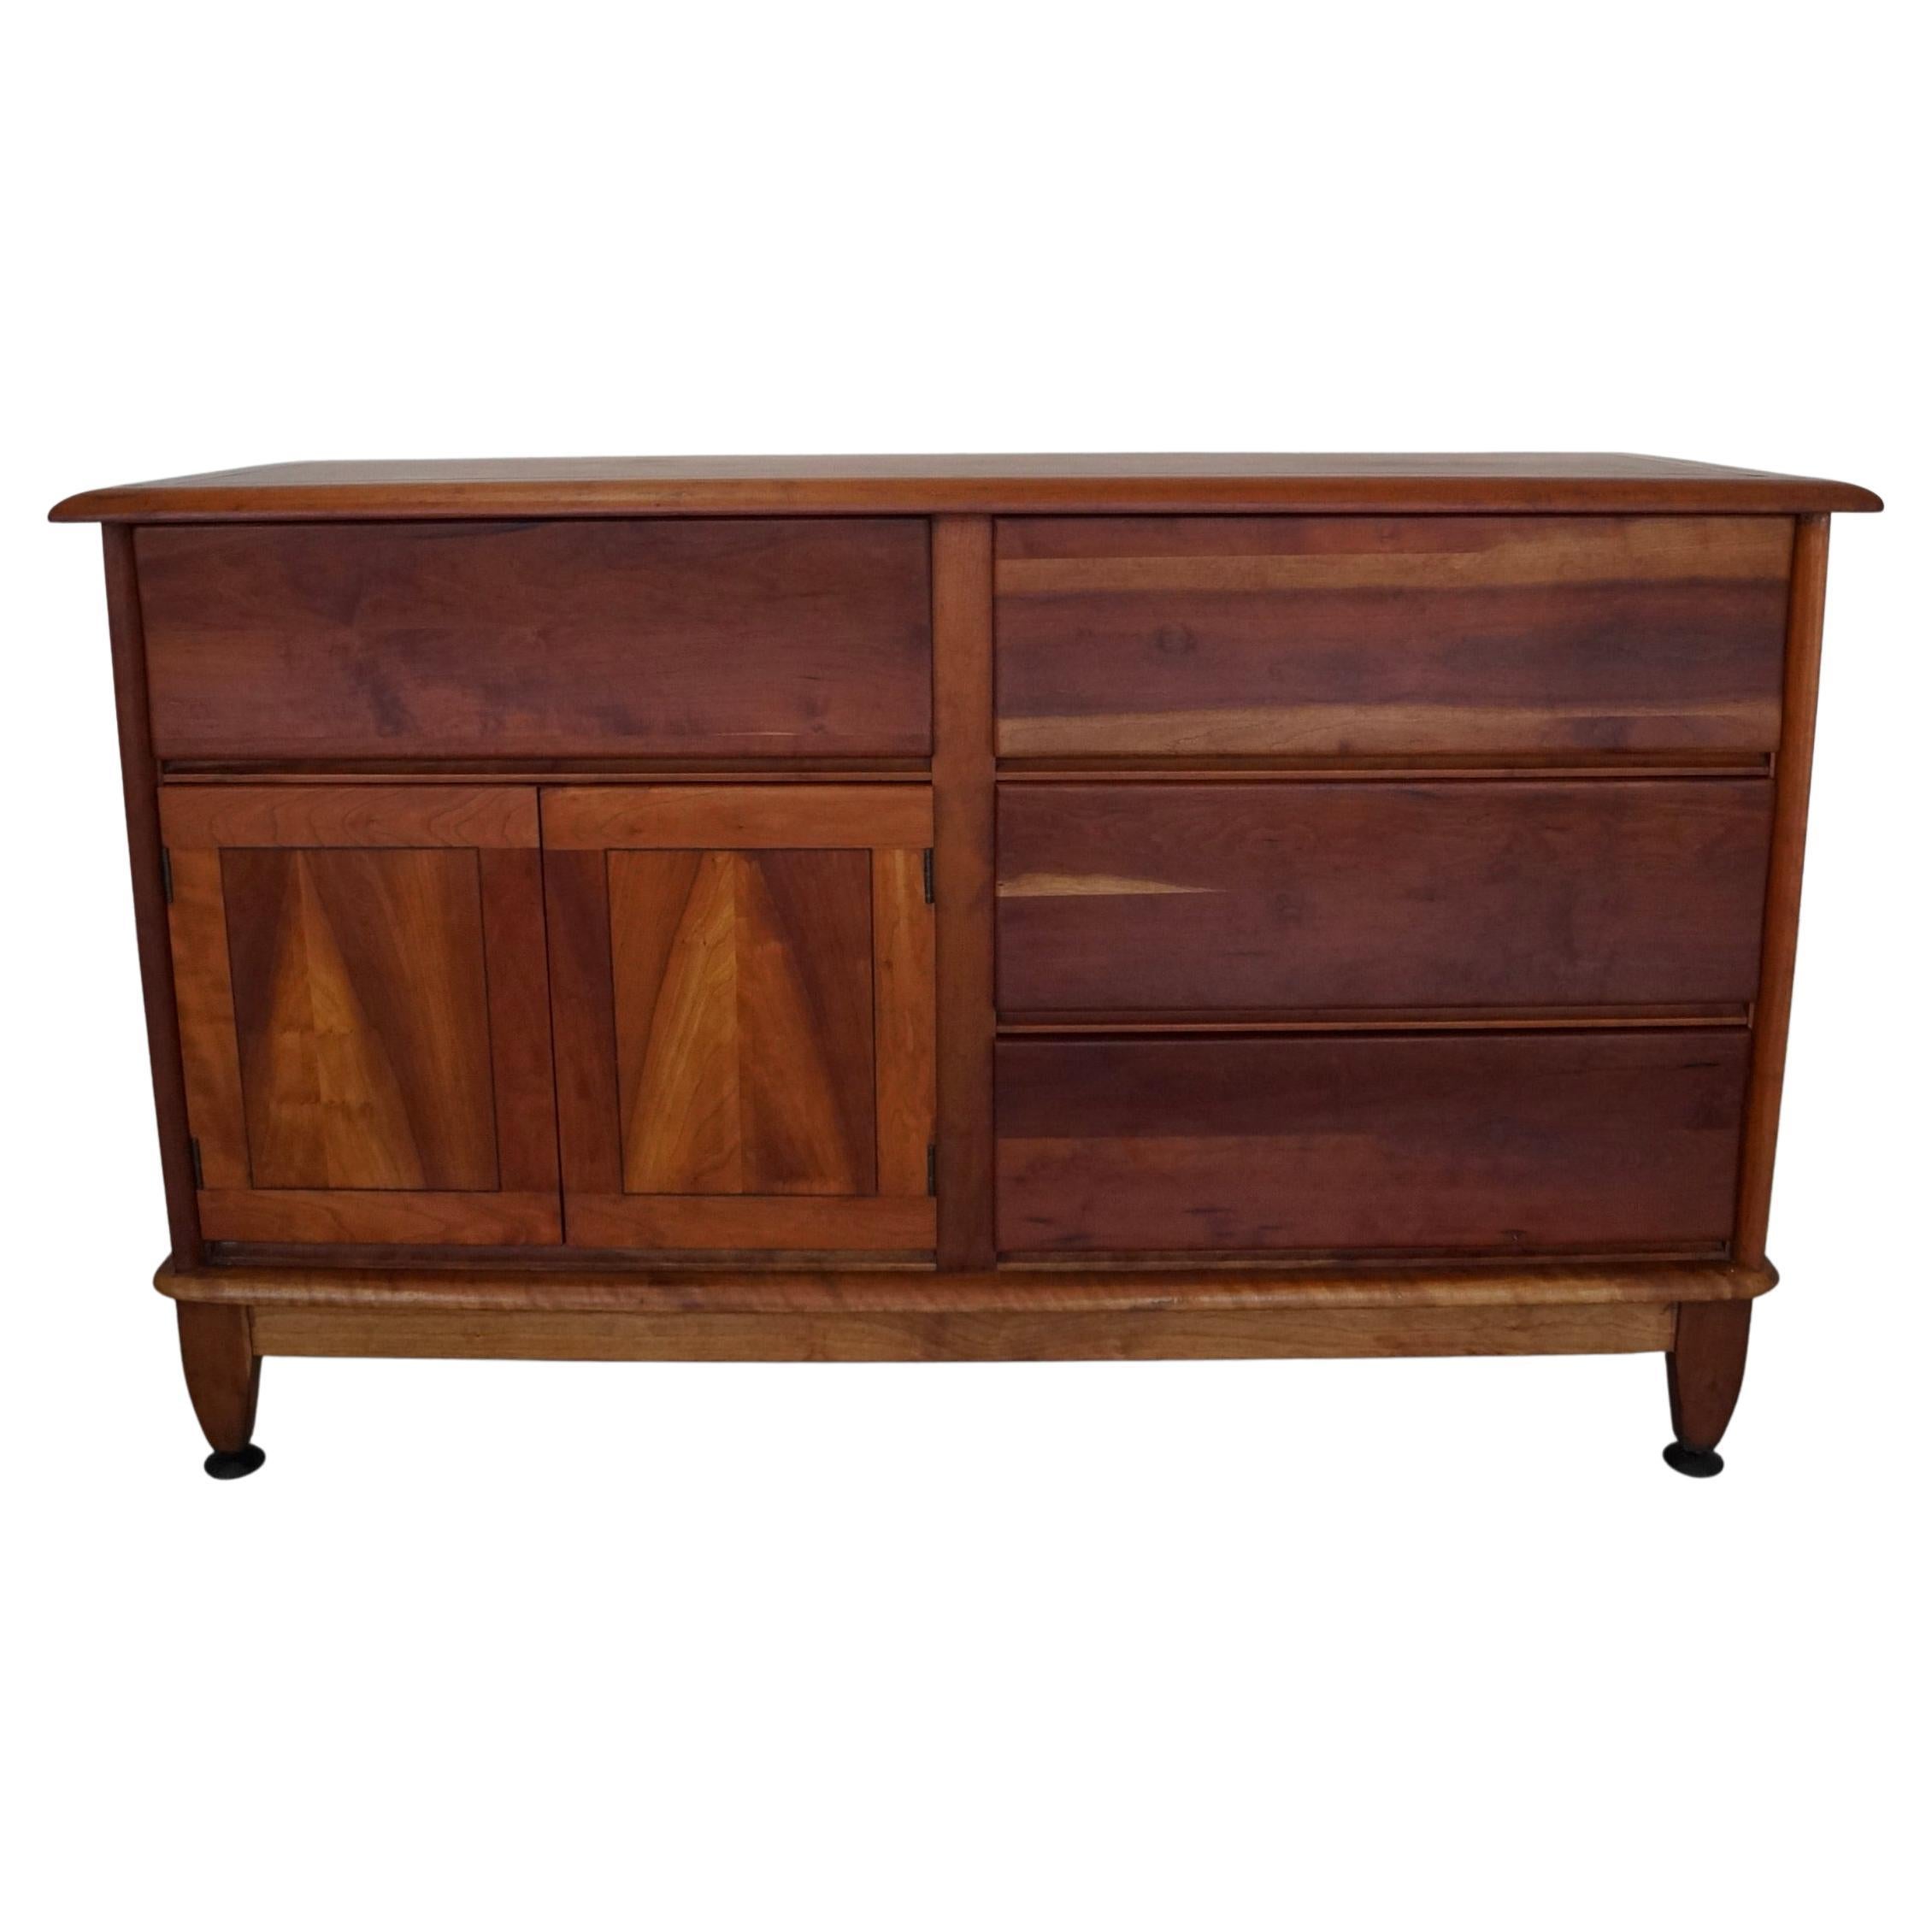 1940's Mid-Century Modern Solid Cherry Morris Sideboard / Credenza